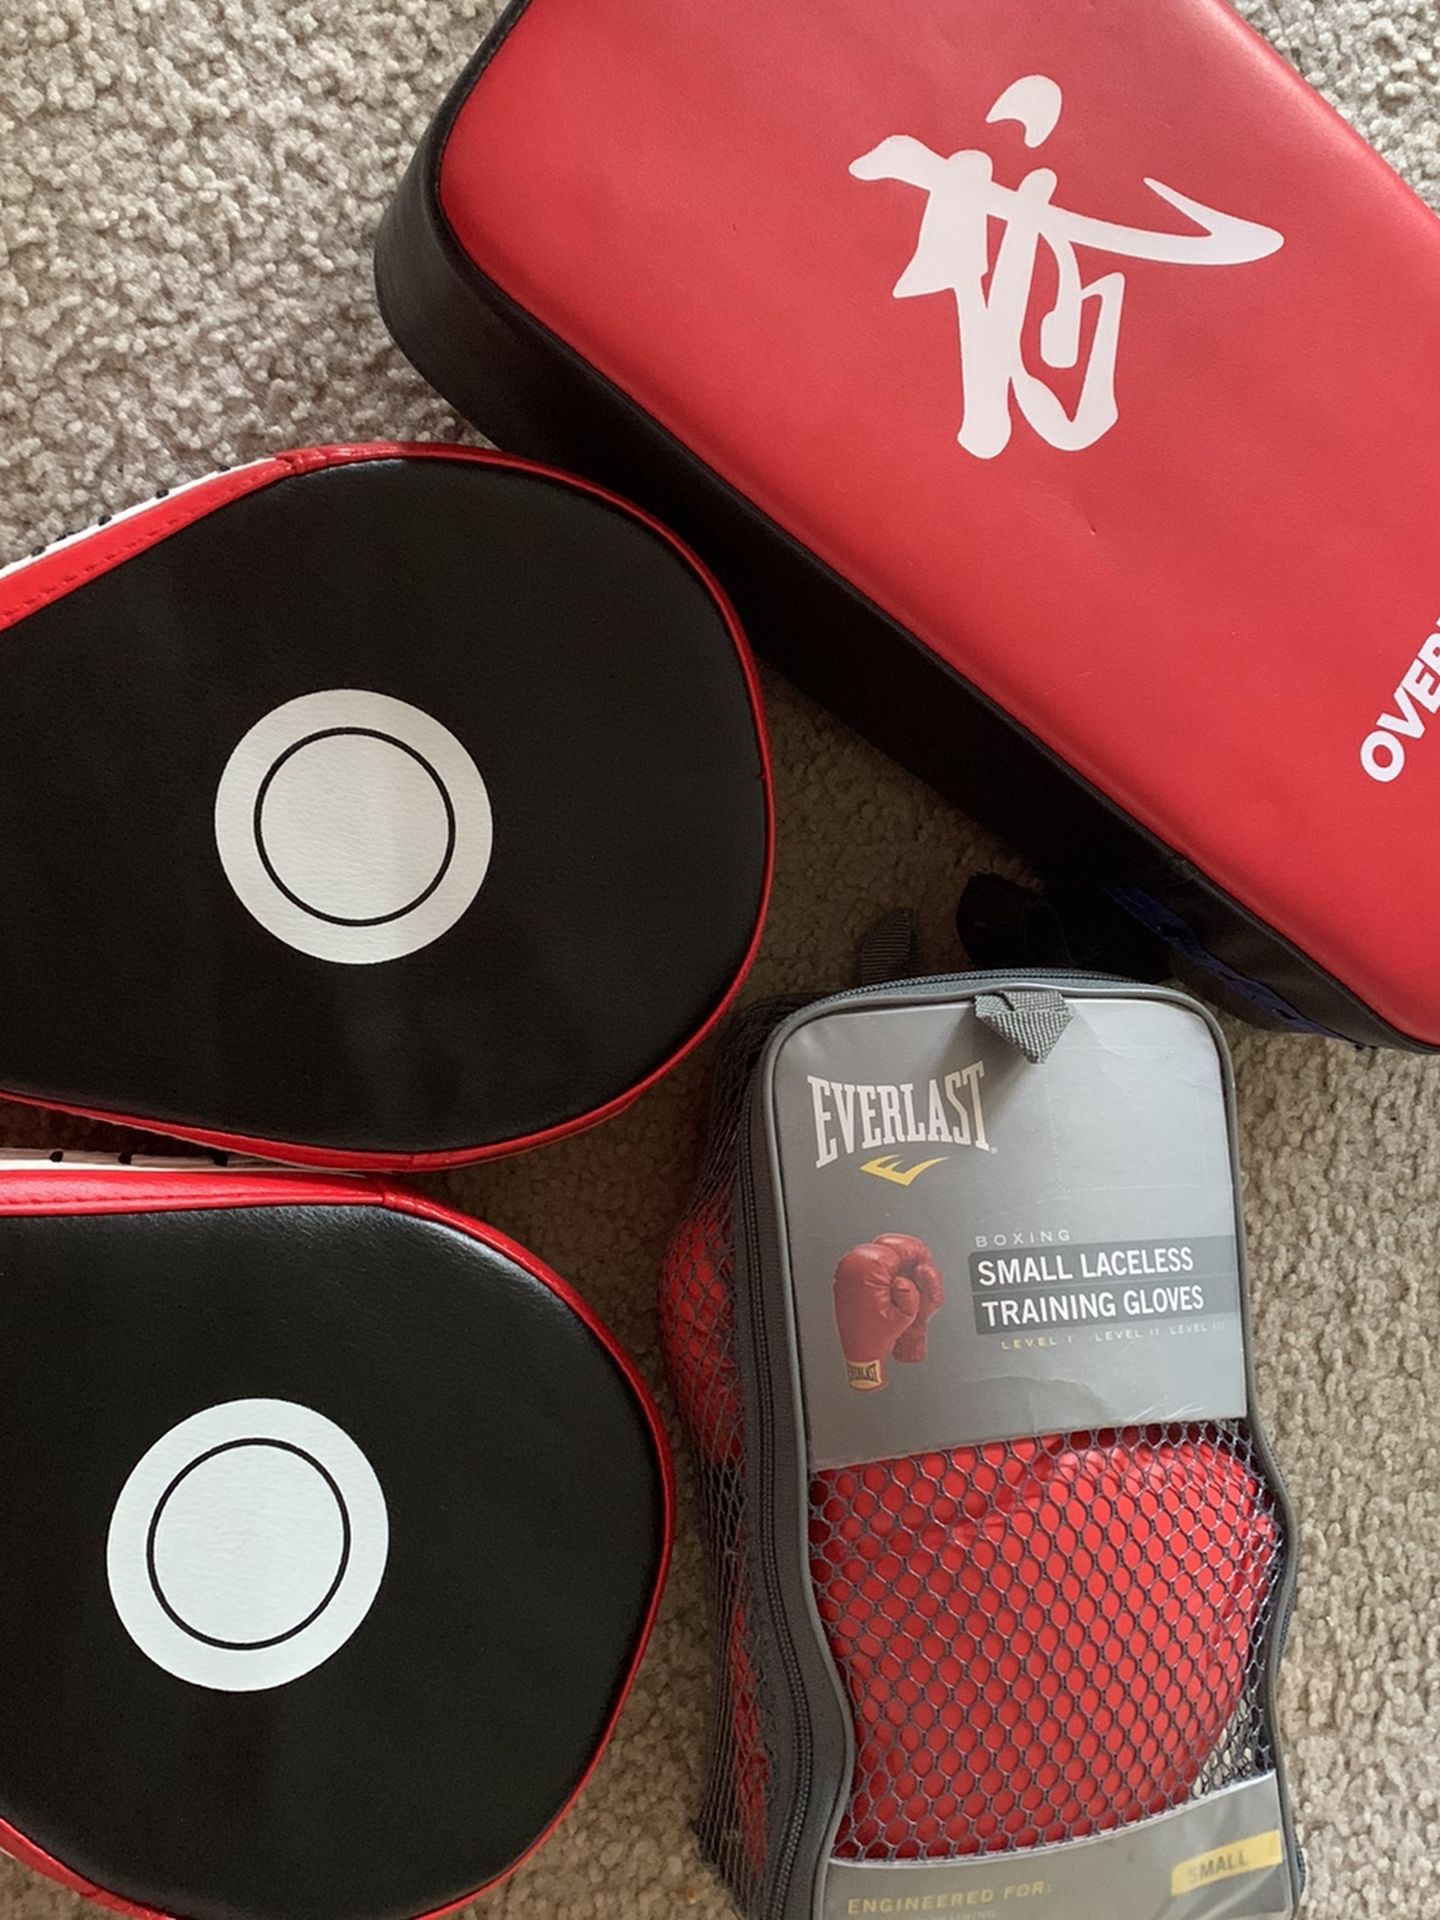 Karate Kicking And Punching Pads With Training Gloves